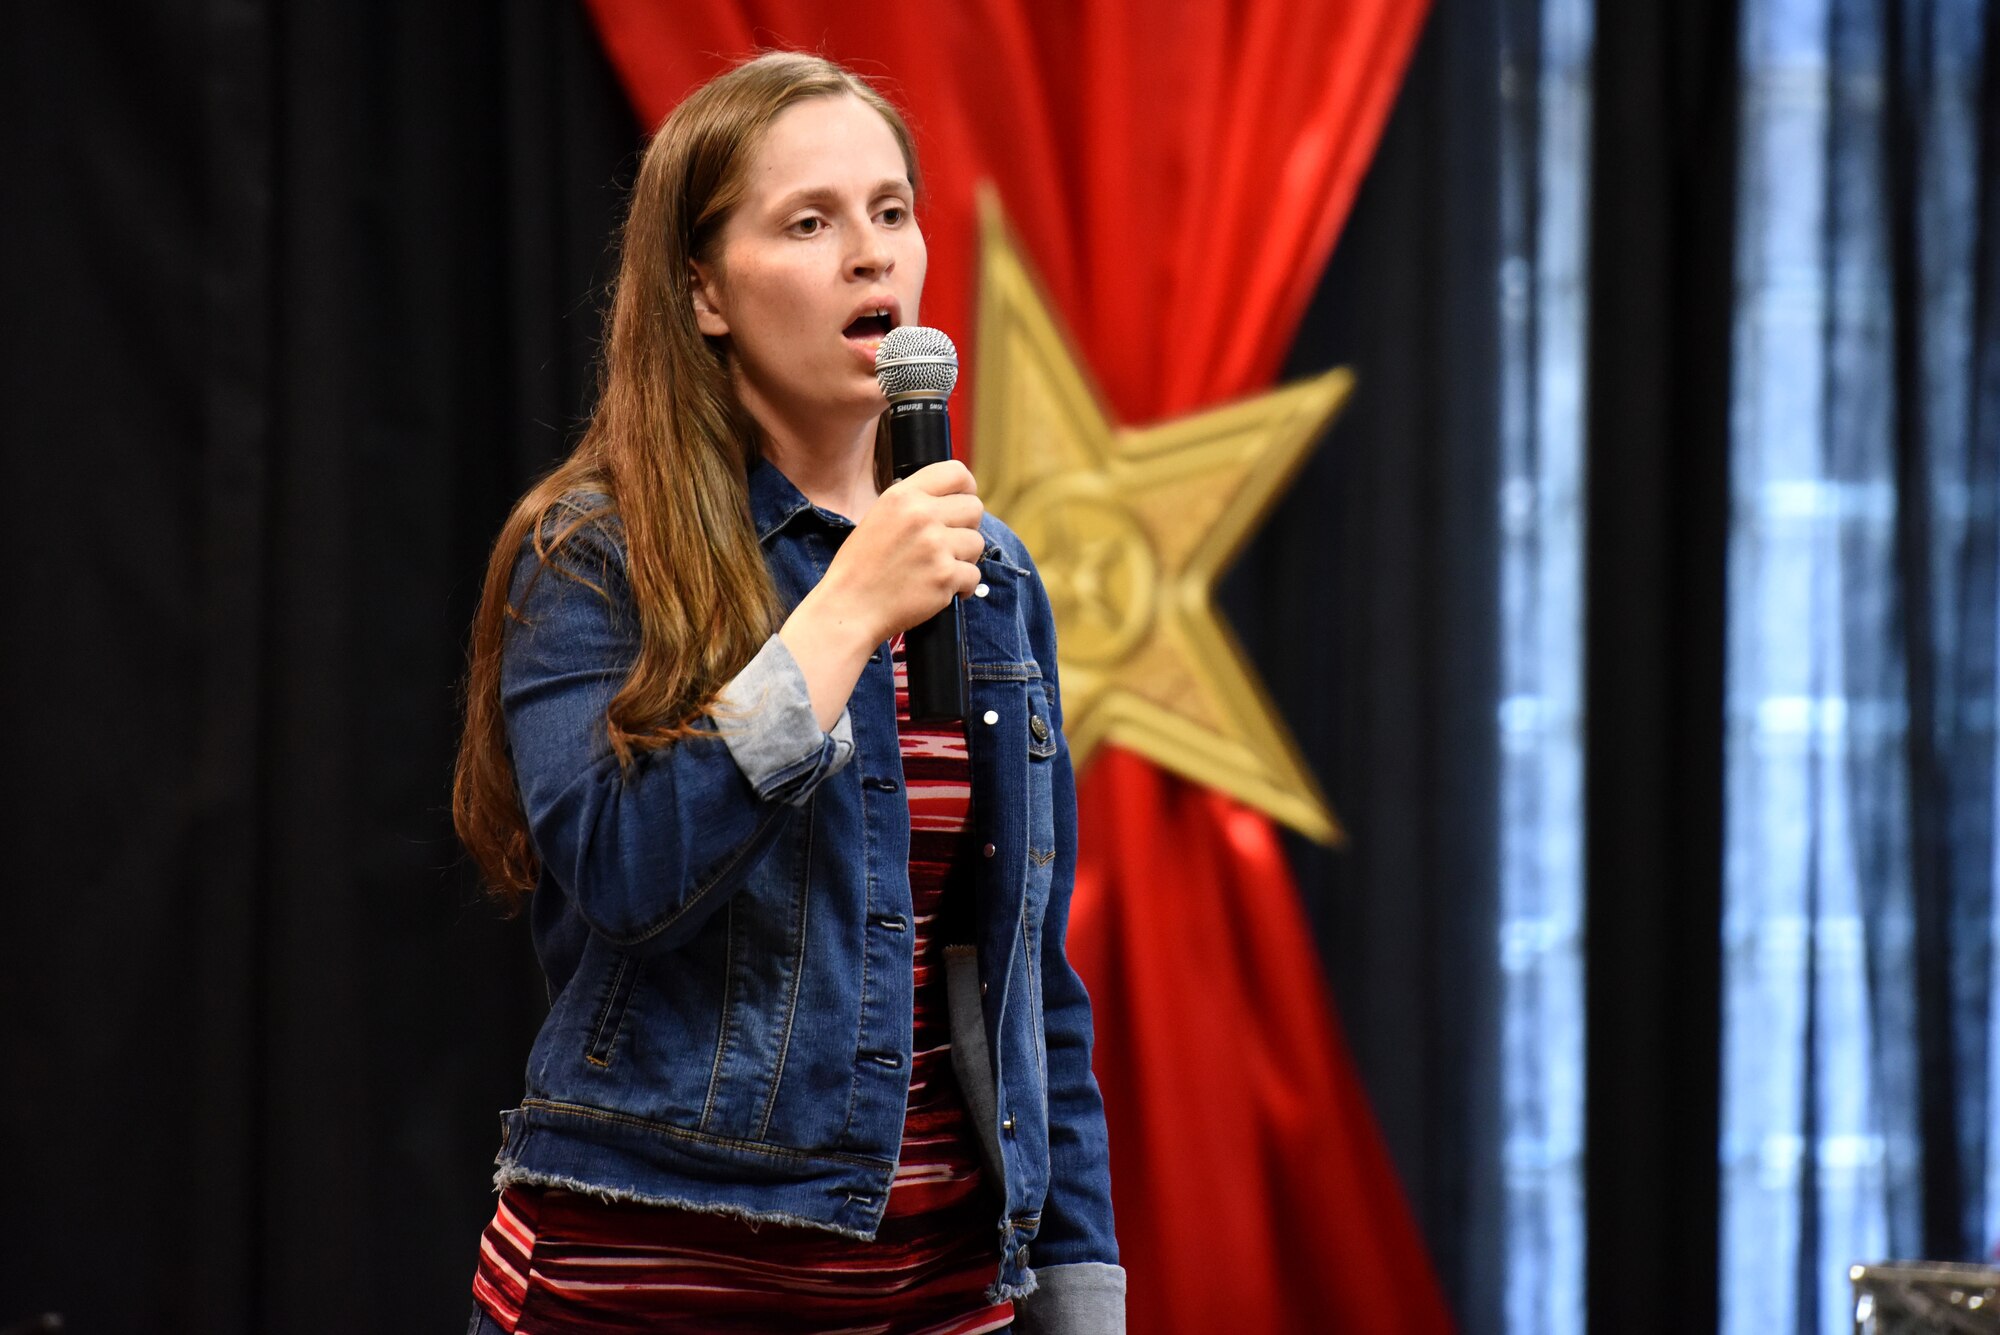 Goodfellow’s Got Talent Show participant, Sariah Berglund sings ‘America the Beautiful’ during the competition at the Event Center on Goodfellow Air Force Base, Texas, June 8, 2018. Berglund placed second in the competition this year. (U.S. Air Force photo by Airman 1st Class Seraiah Hines/Released)